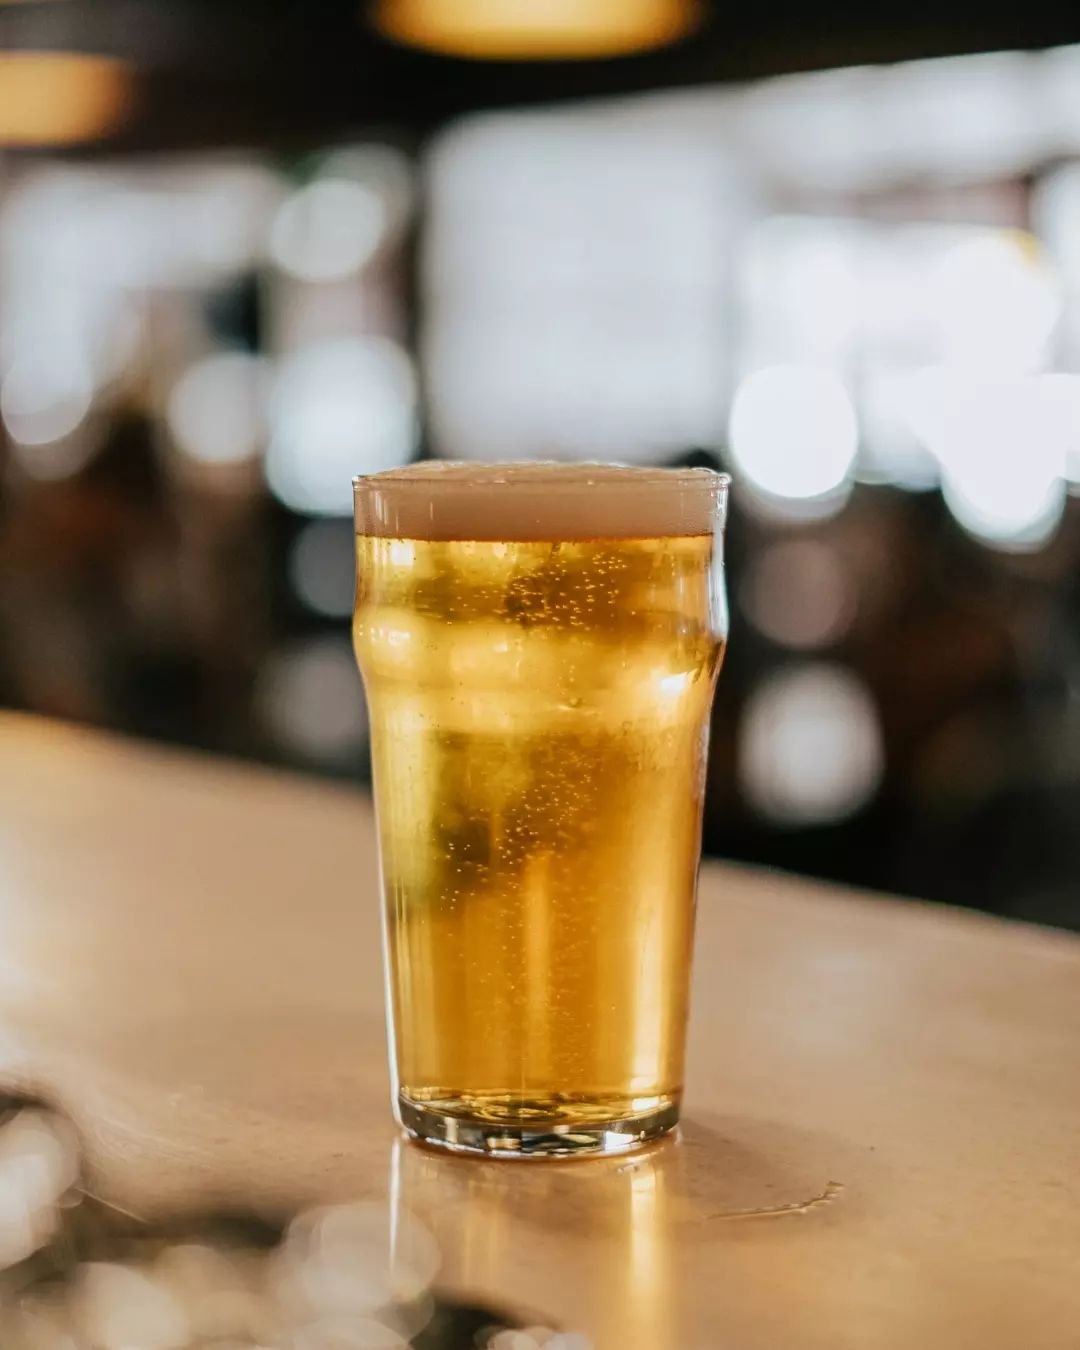 Head down to Paddy's this week for a cold one!&nbsp;

Our Happy Hour is available every day between 5pm - 6pm&nbsp;🍻